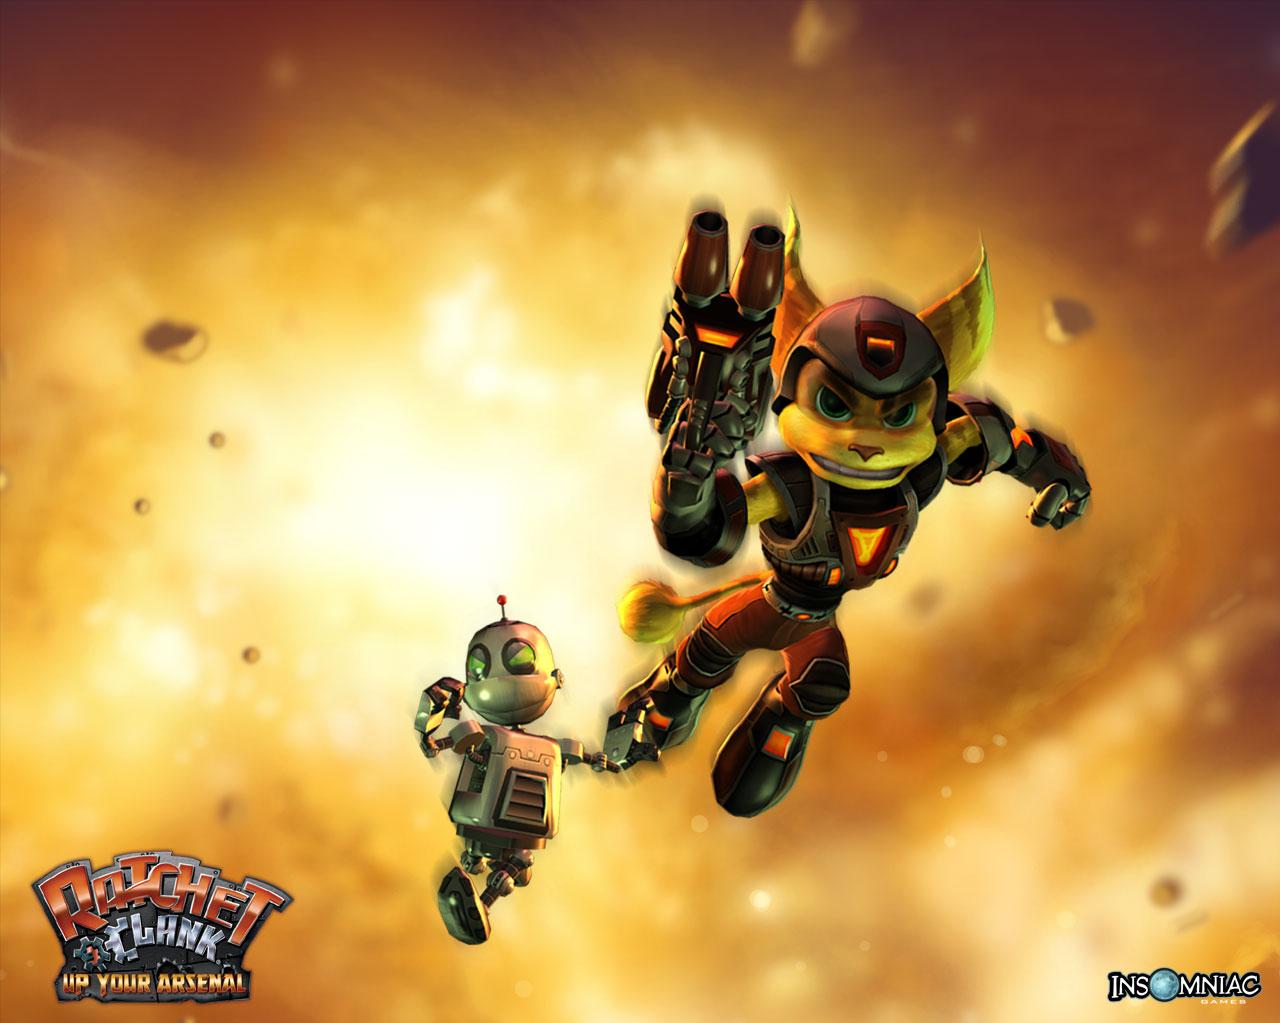 Wallpaper Ratchet K Up Your Arsenal Ps2 Galaxy